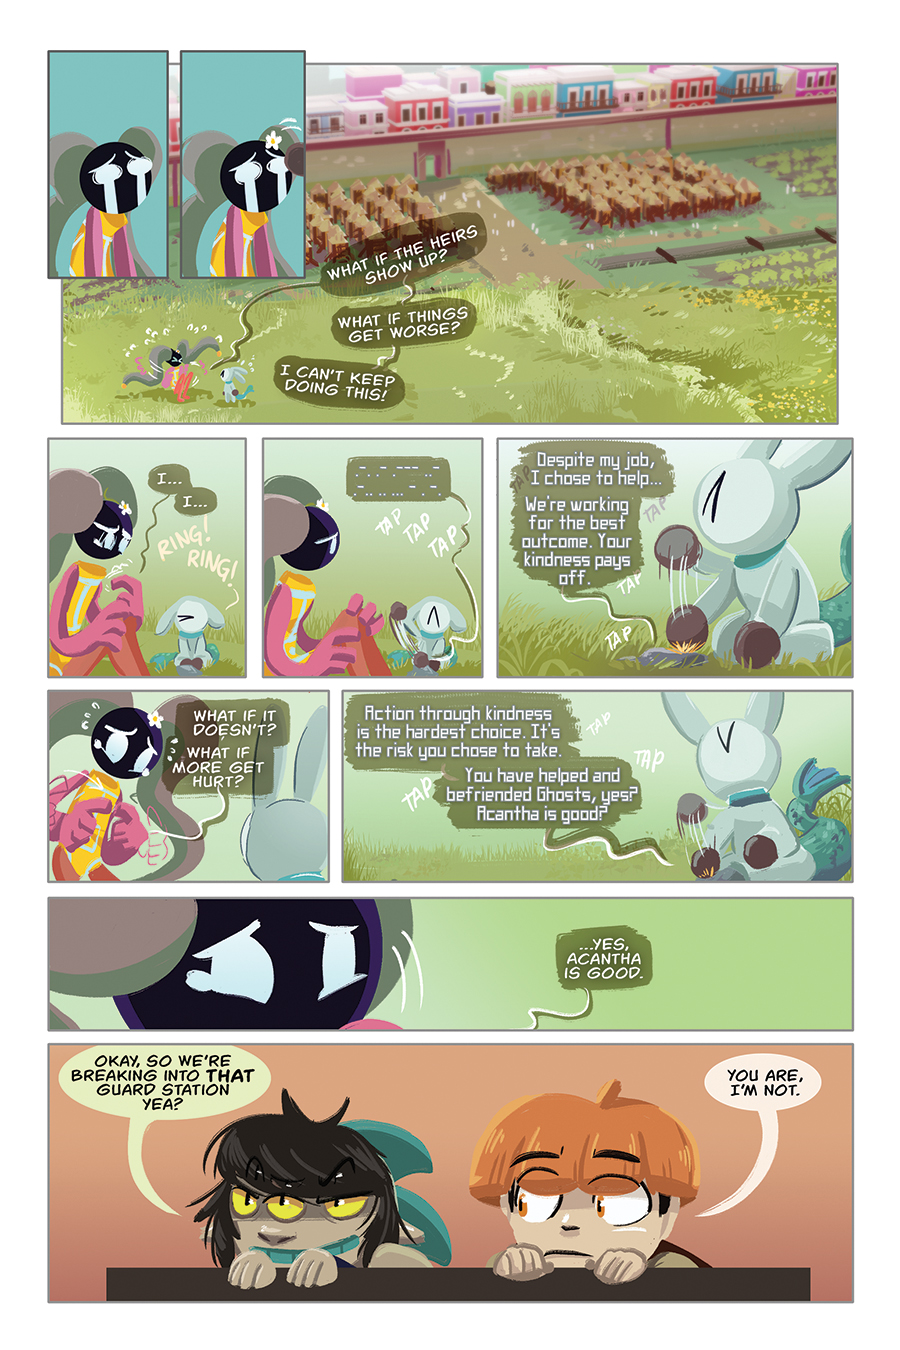 Chapter 8, page 20